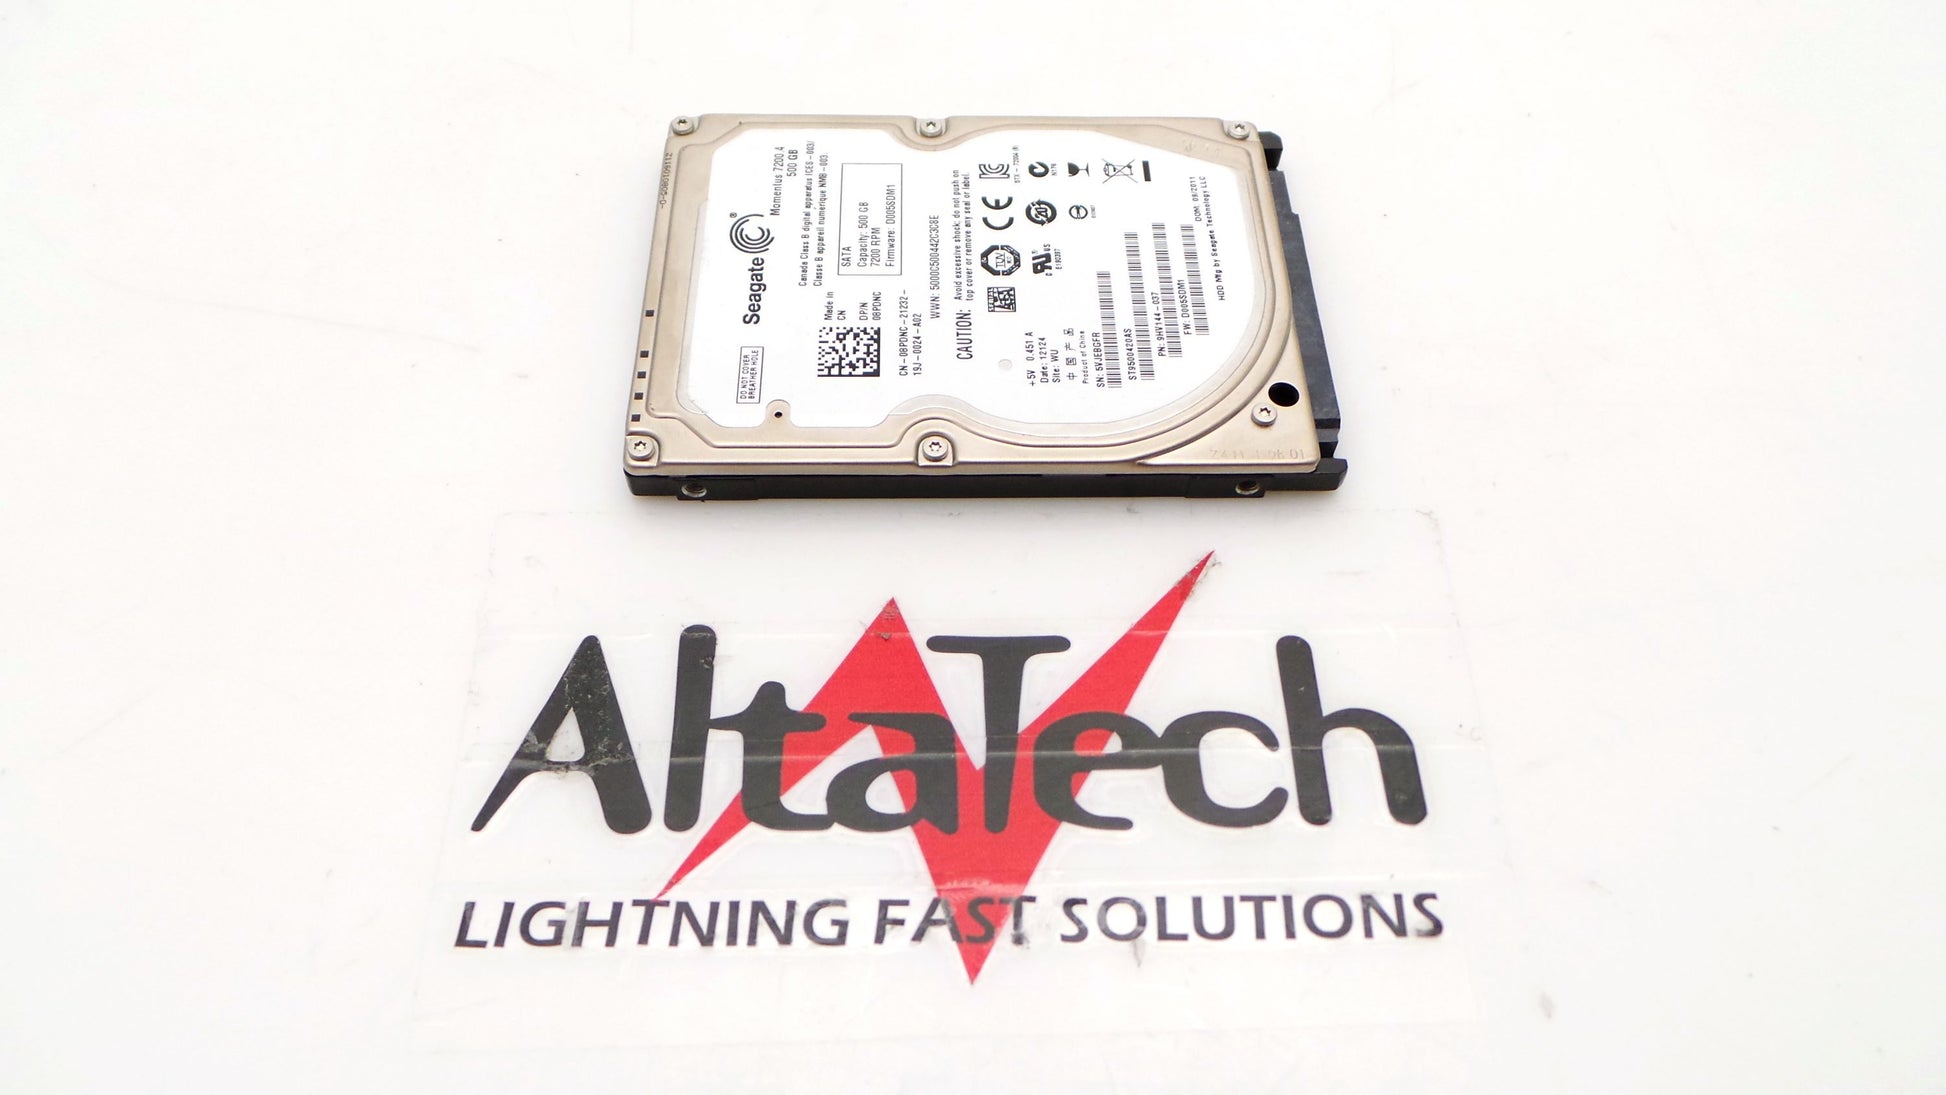 Seagate ST9500420AS Seagate ST9500420AS 500GB 7.2K SATA 2.5 3G HDD Dell G629T Hard Disk Drive, Used